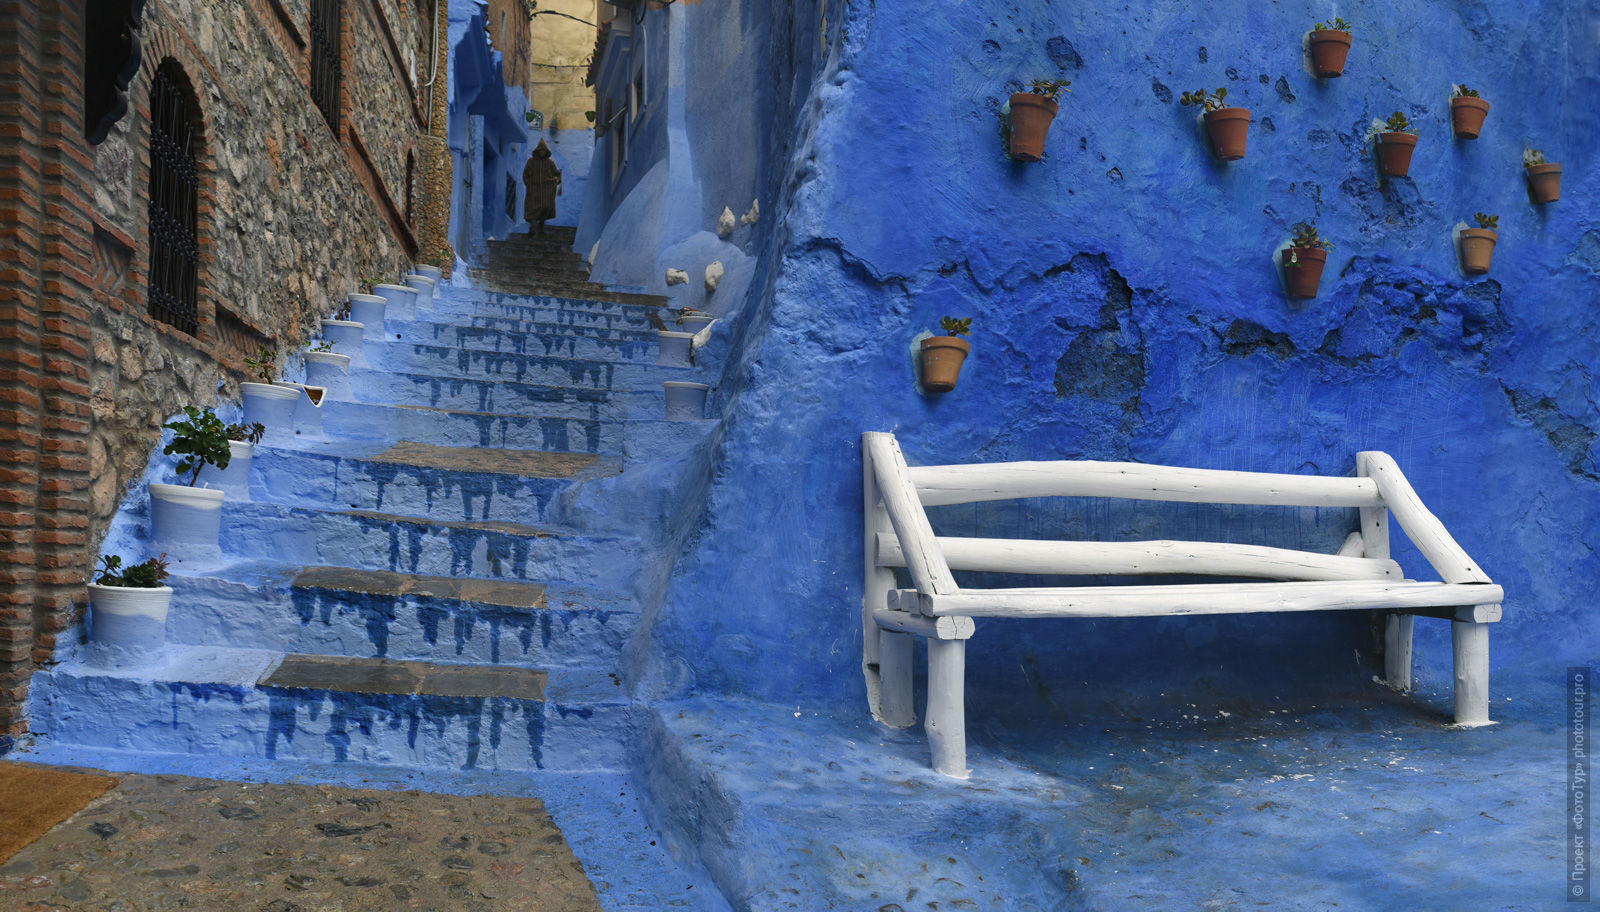 White bench in the blue medina of Chefchaouen, Morocco. Adventure photo tour: medina, cascades, sands and ports of Morocco, April 4 - 17, 2020.